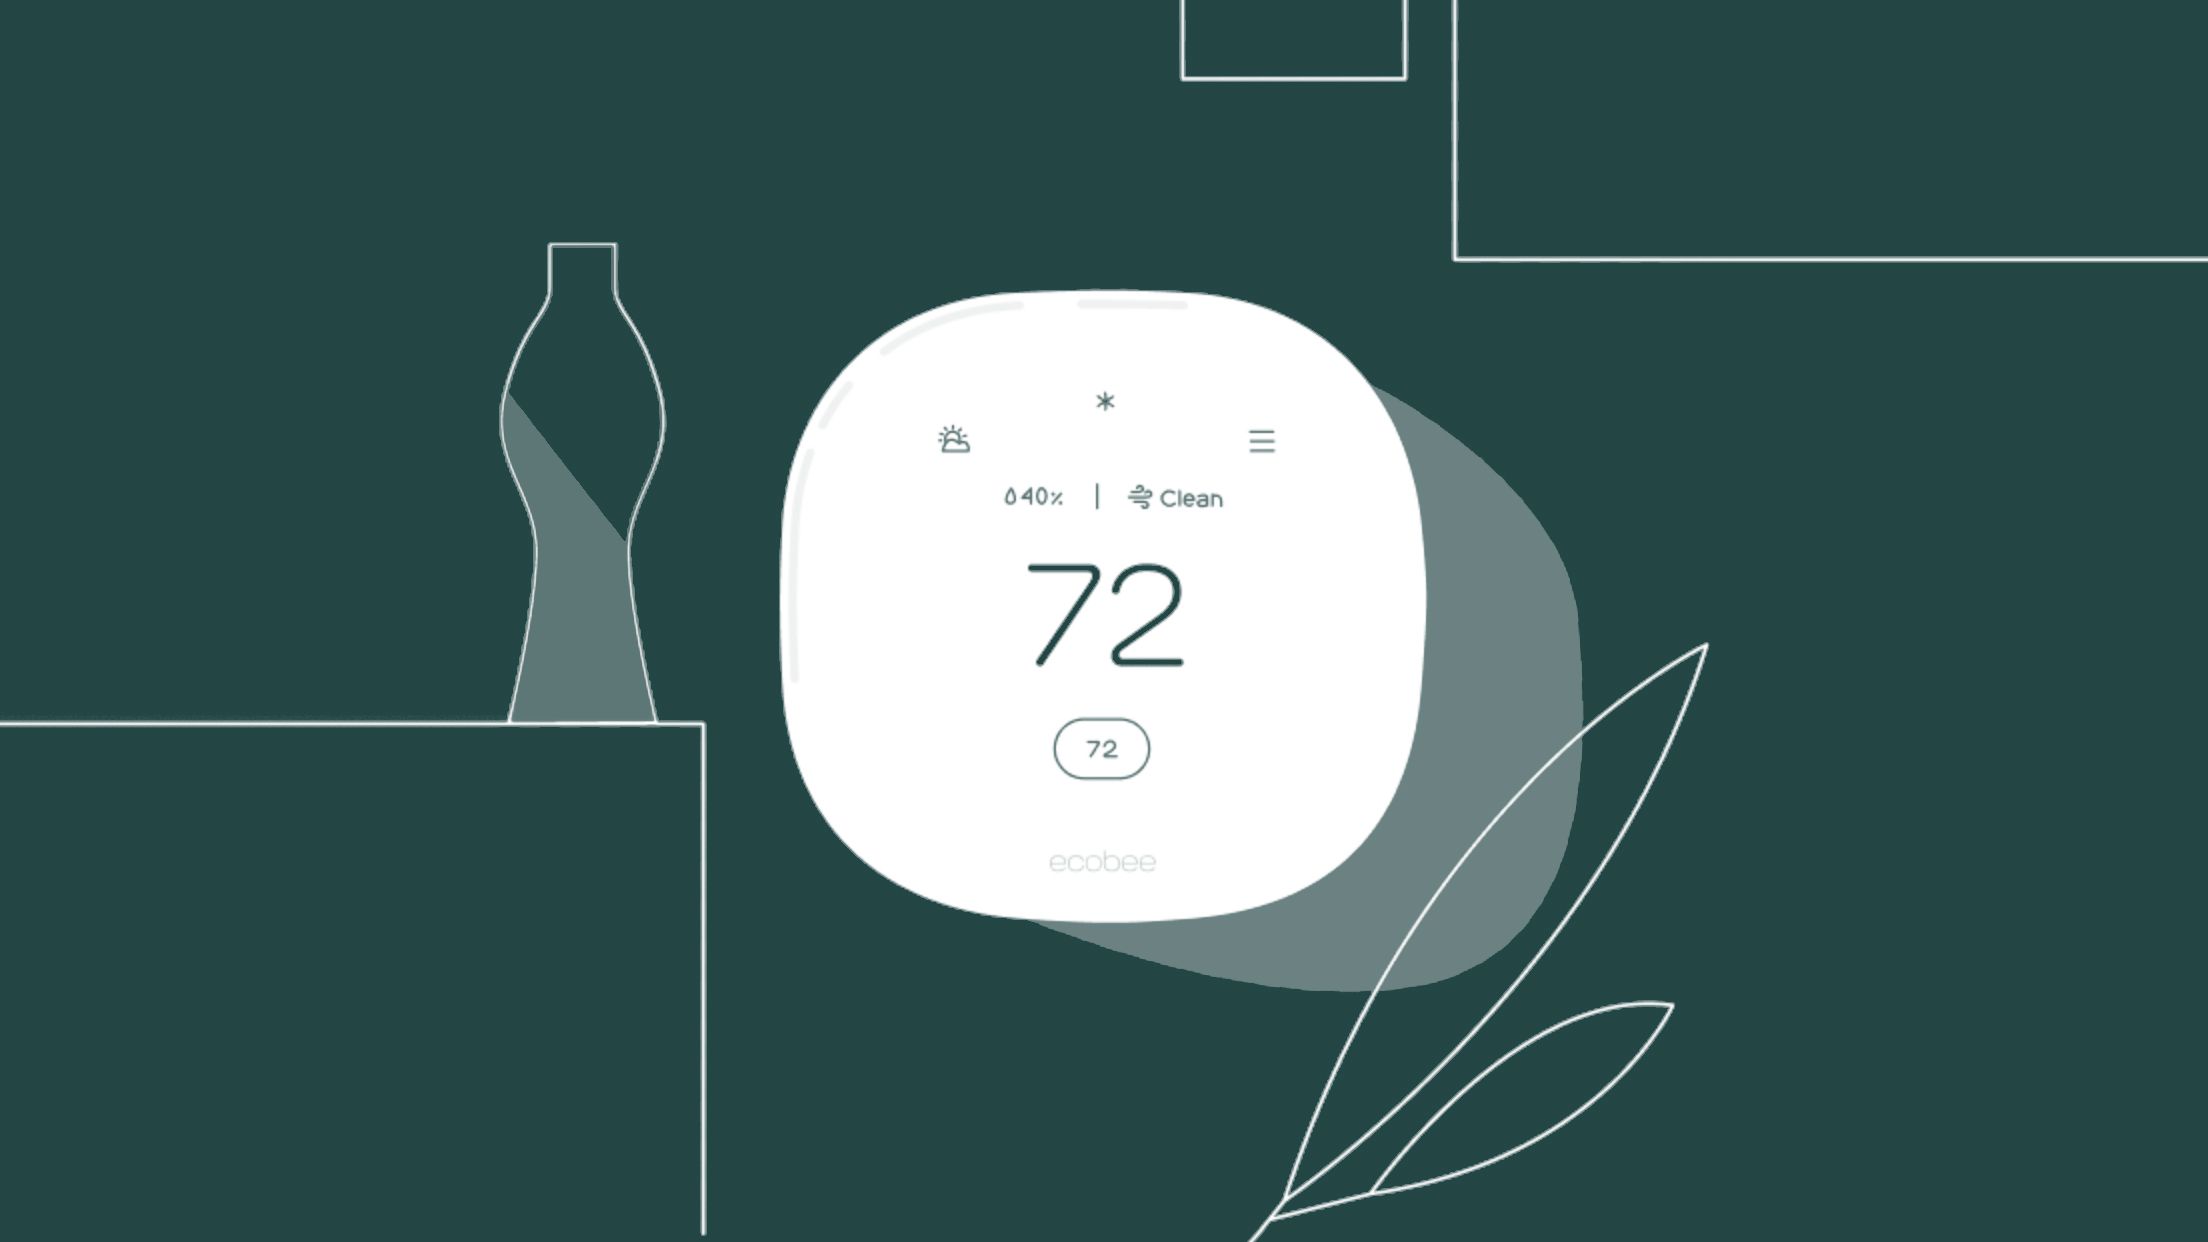 Ecobee Planning New Smart Thermostat With Built-In Air Quality Sensor - macrumors.com